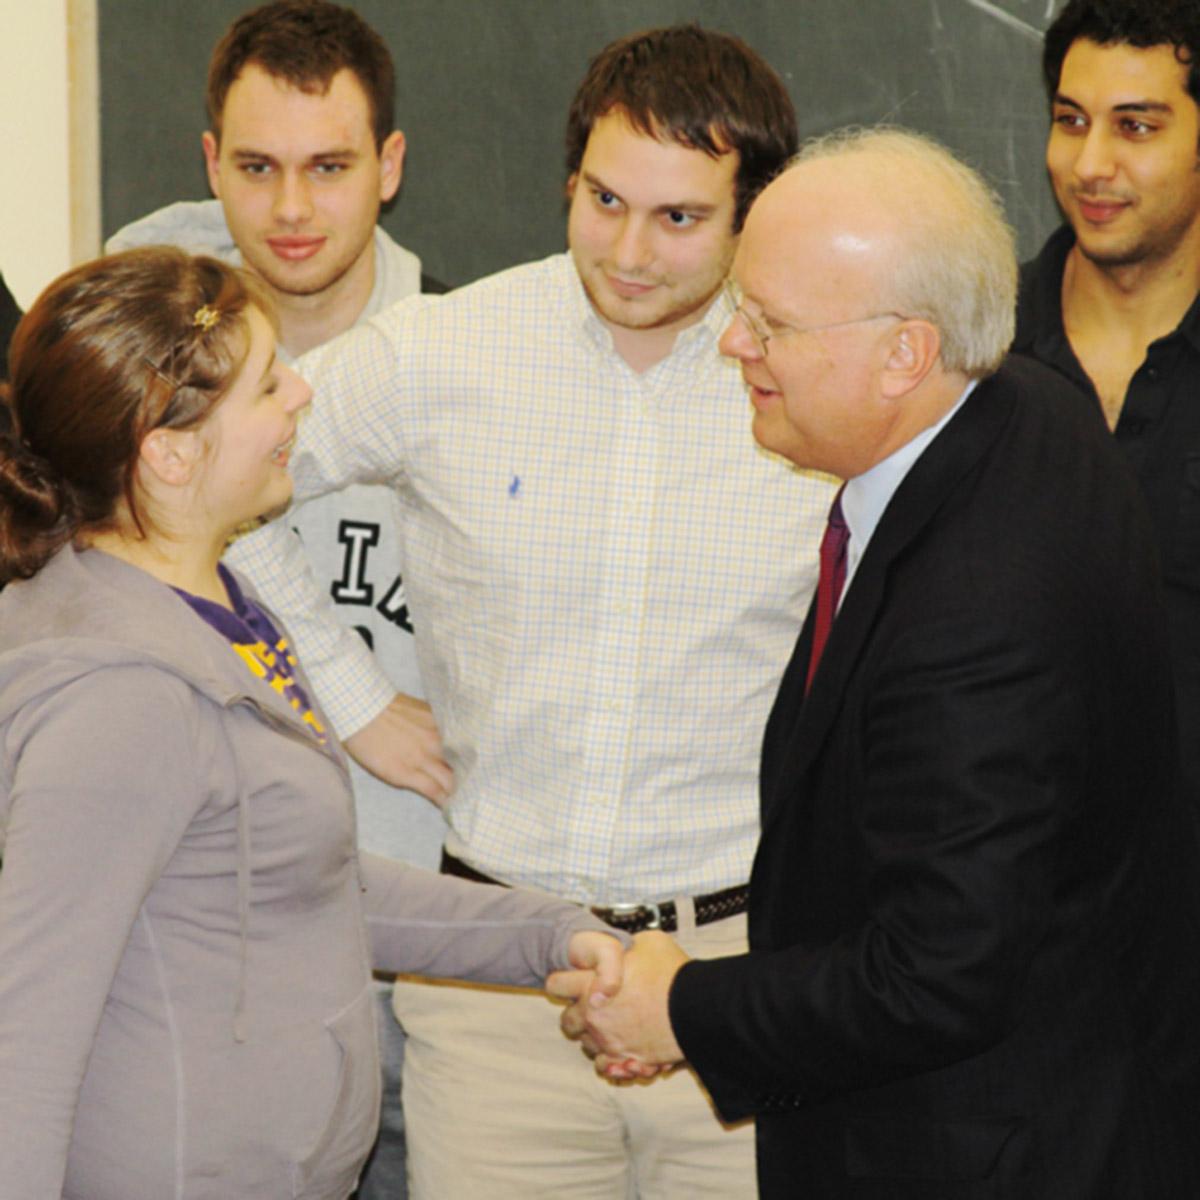 Republican political strategist Karl Rove meets with Randolph students prior to a lecture on campus.